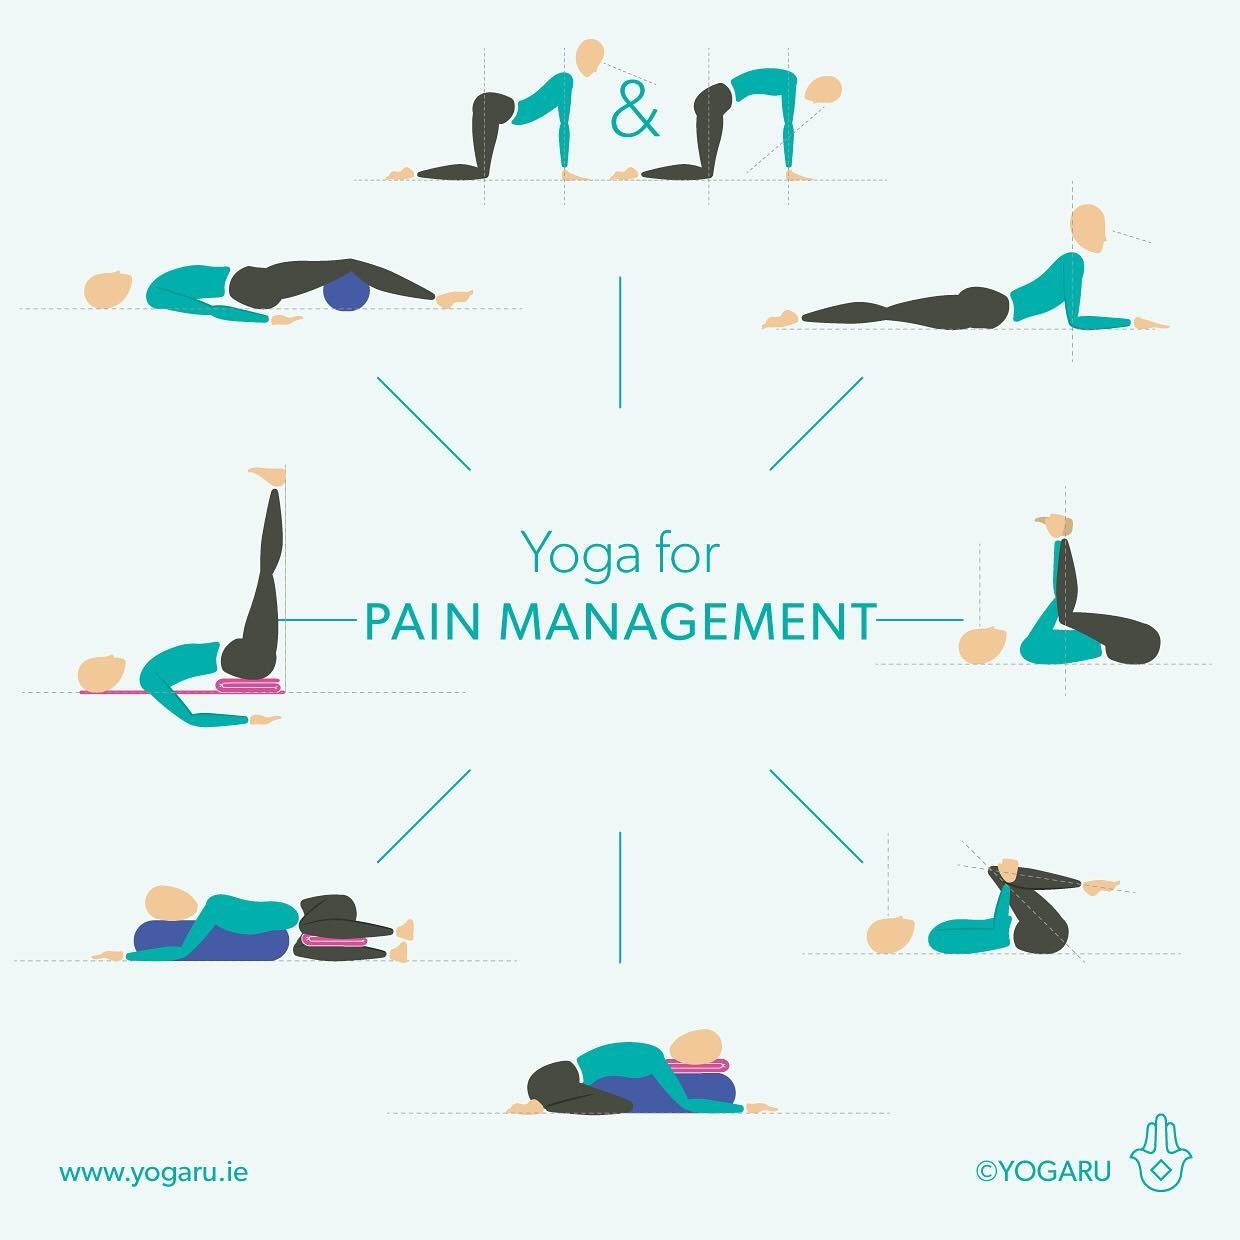 YOGA FOR PAIN RELIEF. Pain can manifest in many ways and can be either acute or chronic. A gentle practice that helps reduce pain related stress, helps you breath and encourages you to relieve physical tensions can be very a beneficial tool to manage